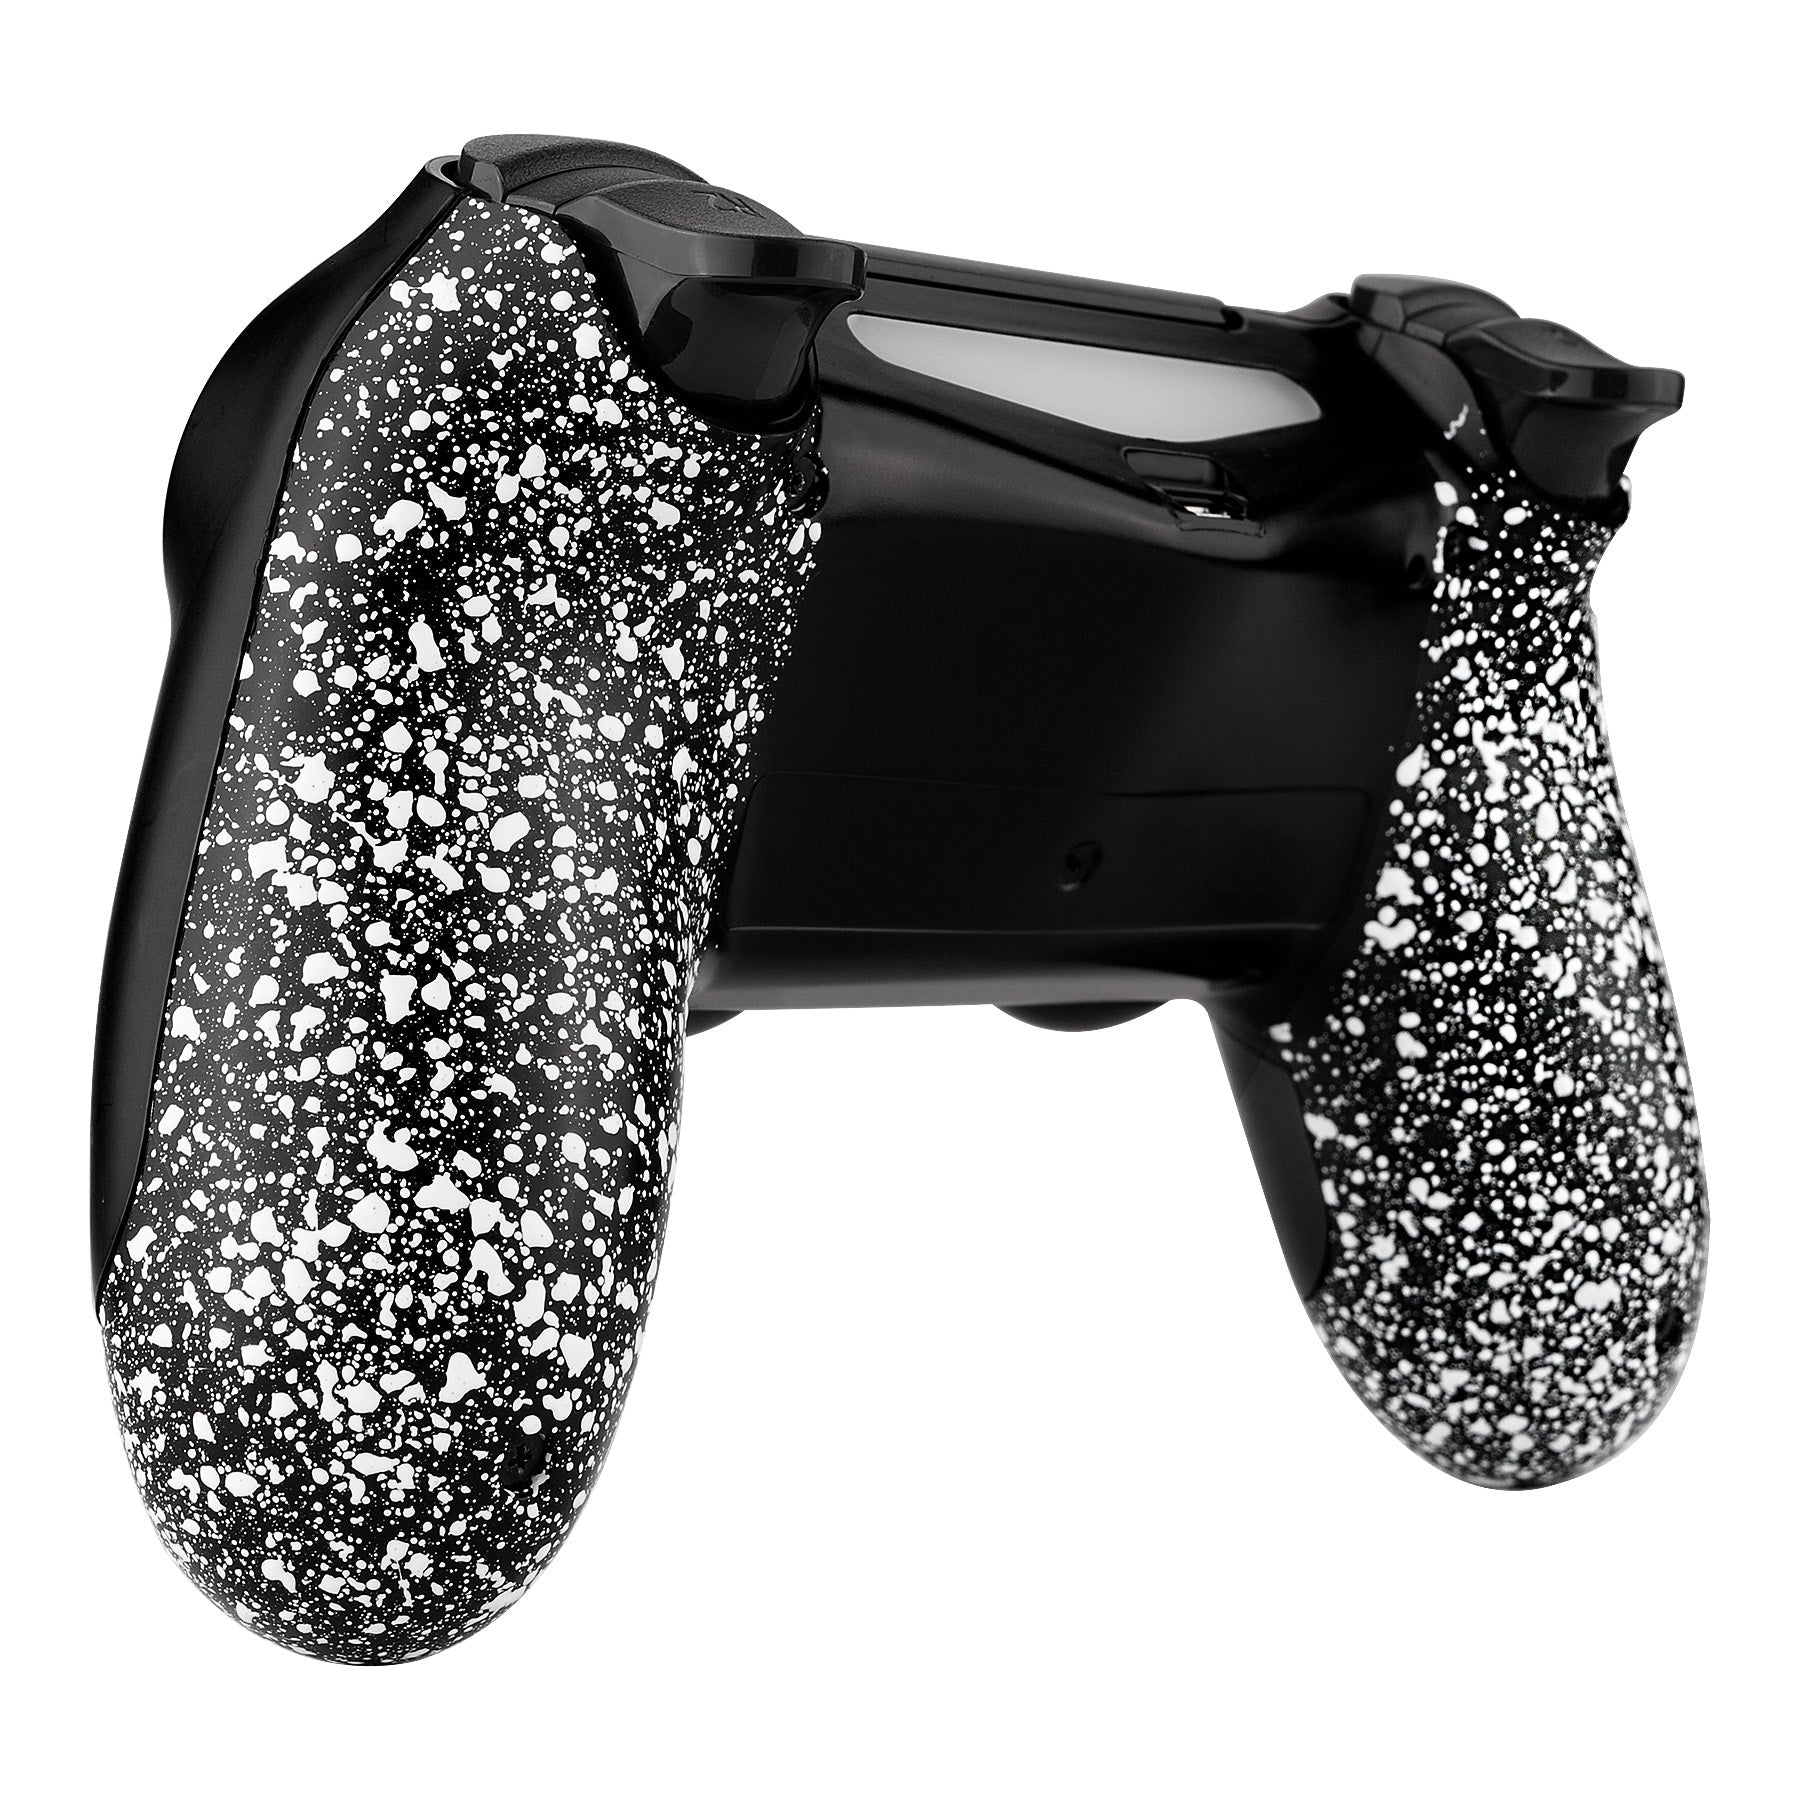 eXtremeRate Retail Textured White Comfortable Non-slip Back Shell for ps4 Slim Pro Game Controller - SP4BR02